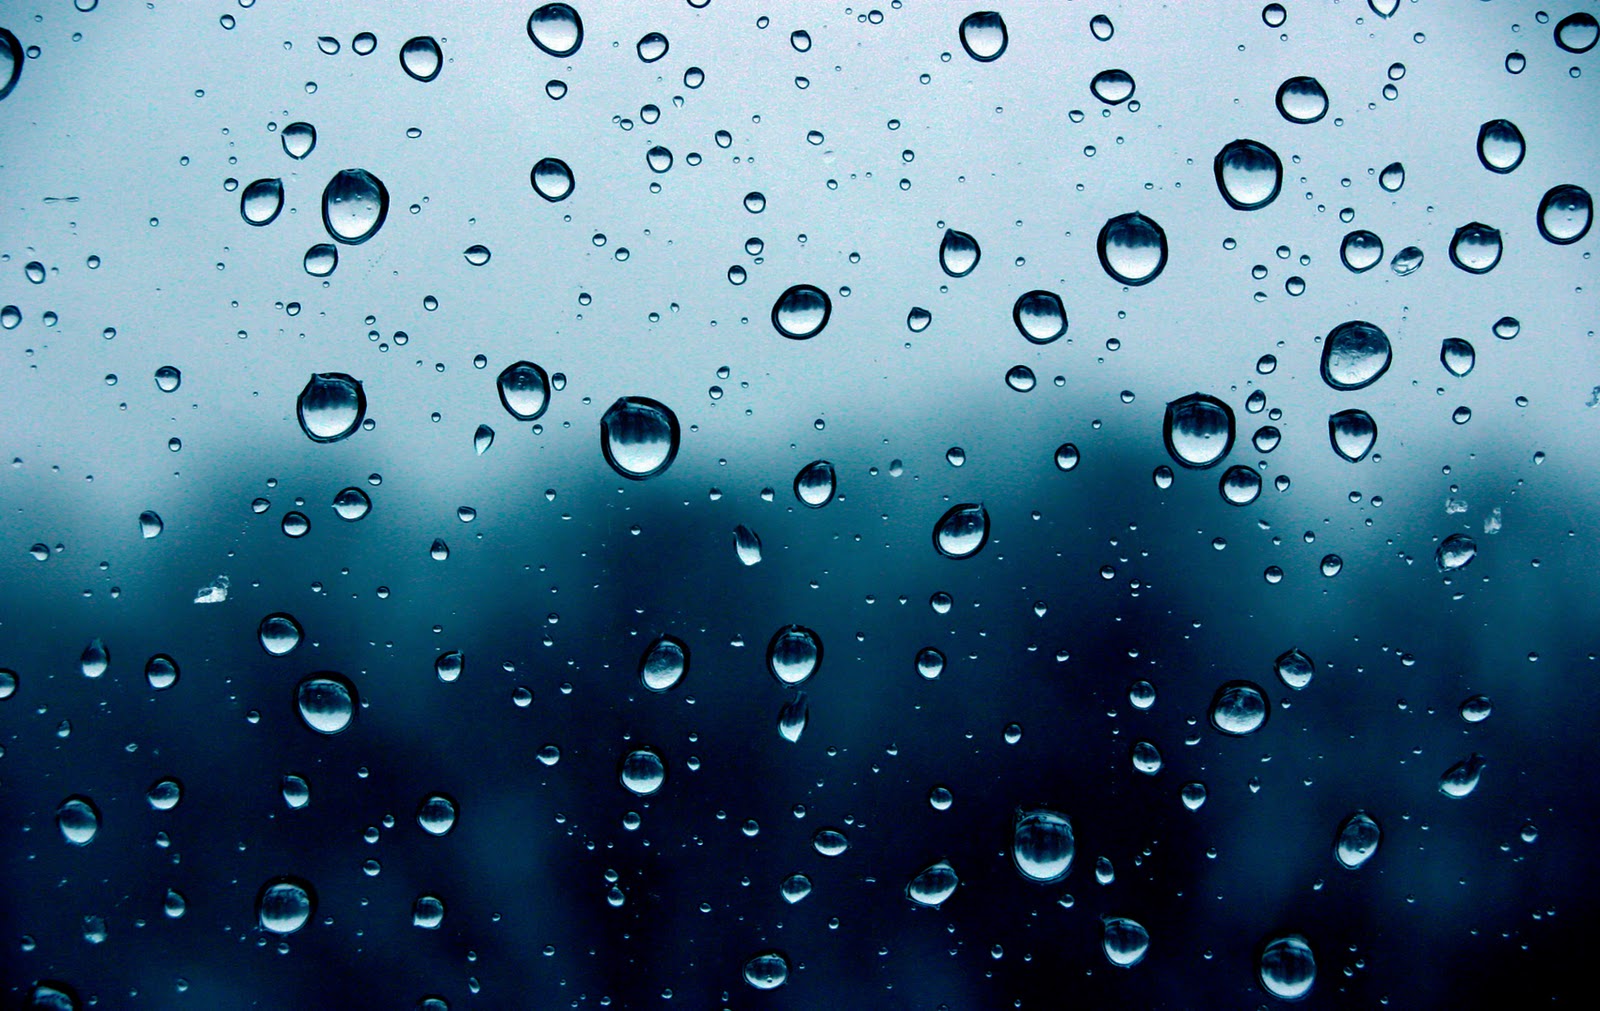 Raindrops Backgrounds image gallery